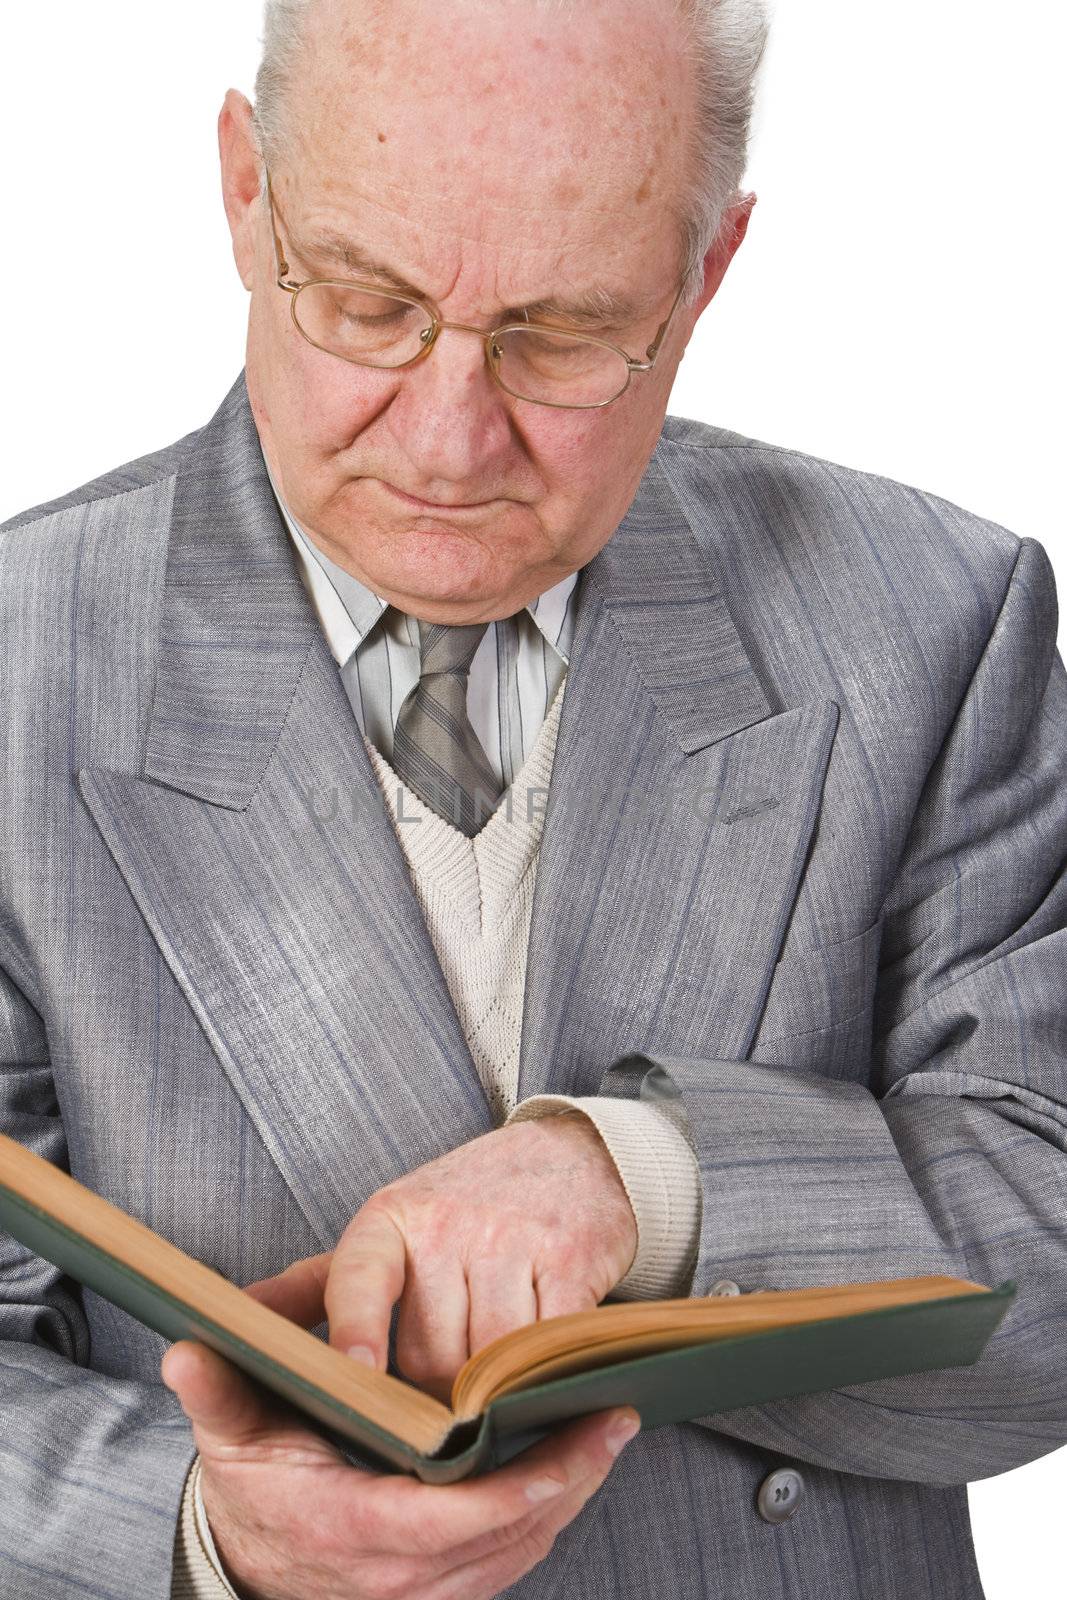 Close-up image of a senior man reading a book attentively.Shot with Canon 70-200mm f/2.8L IS USM